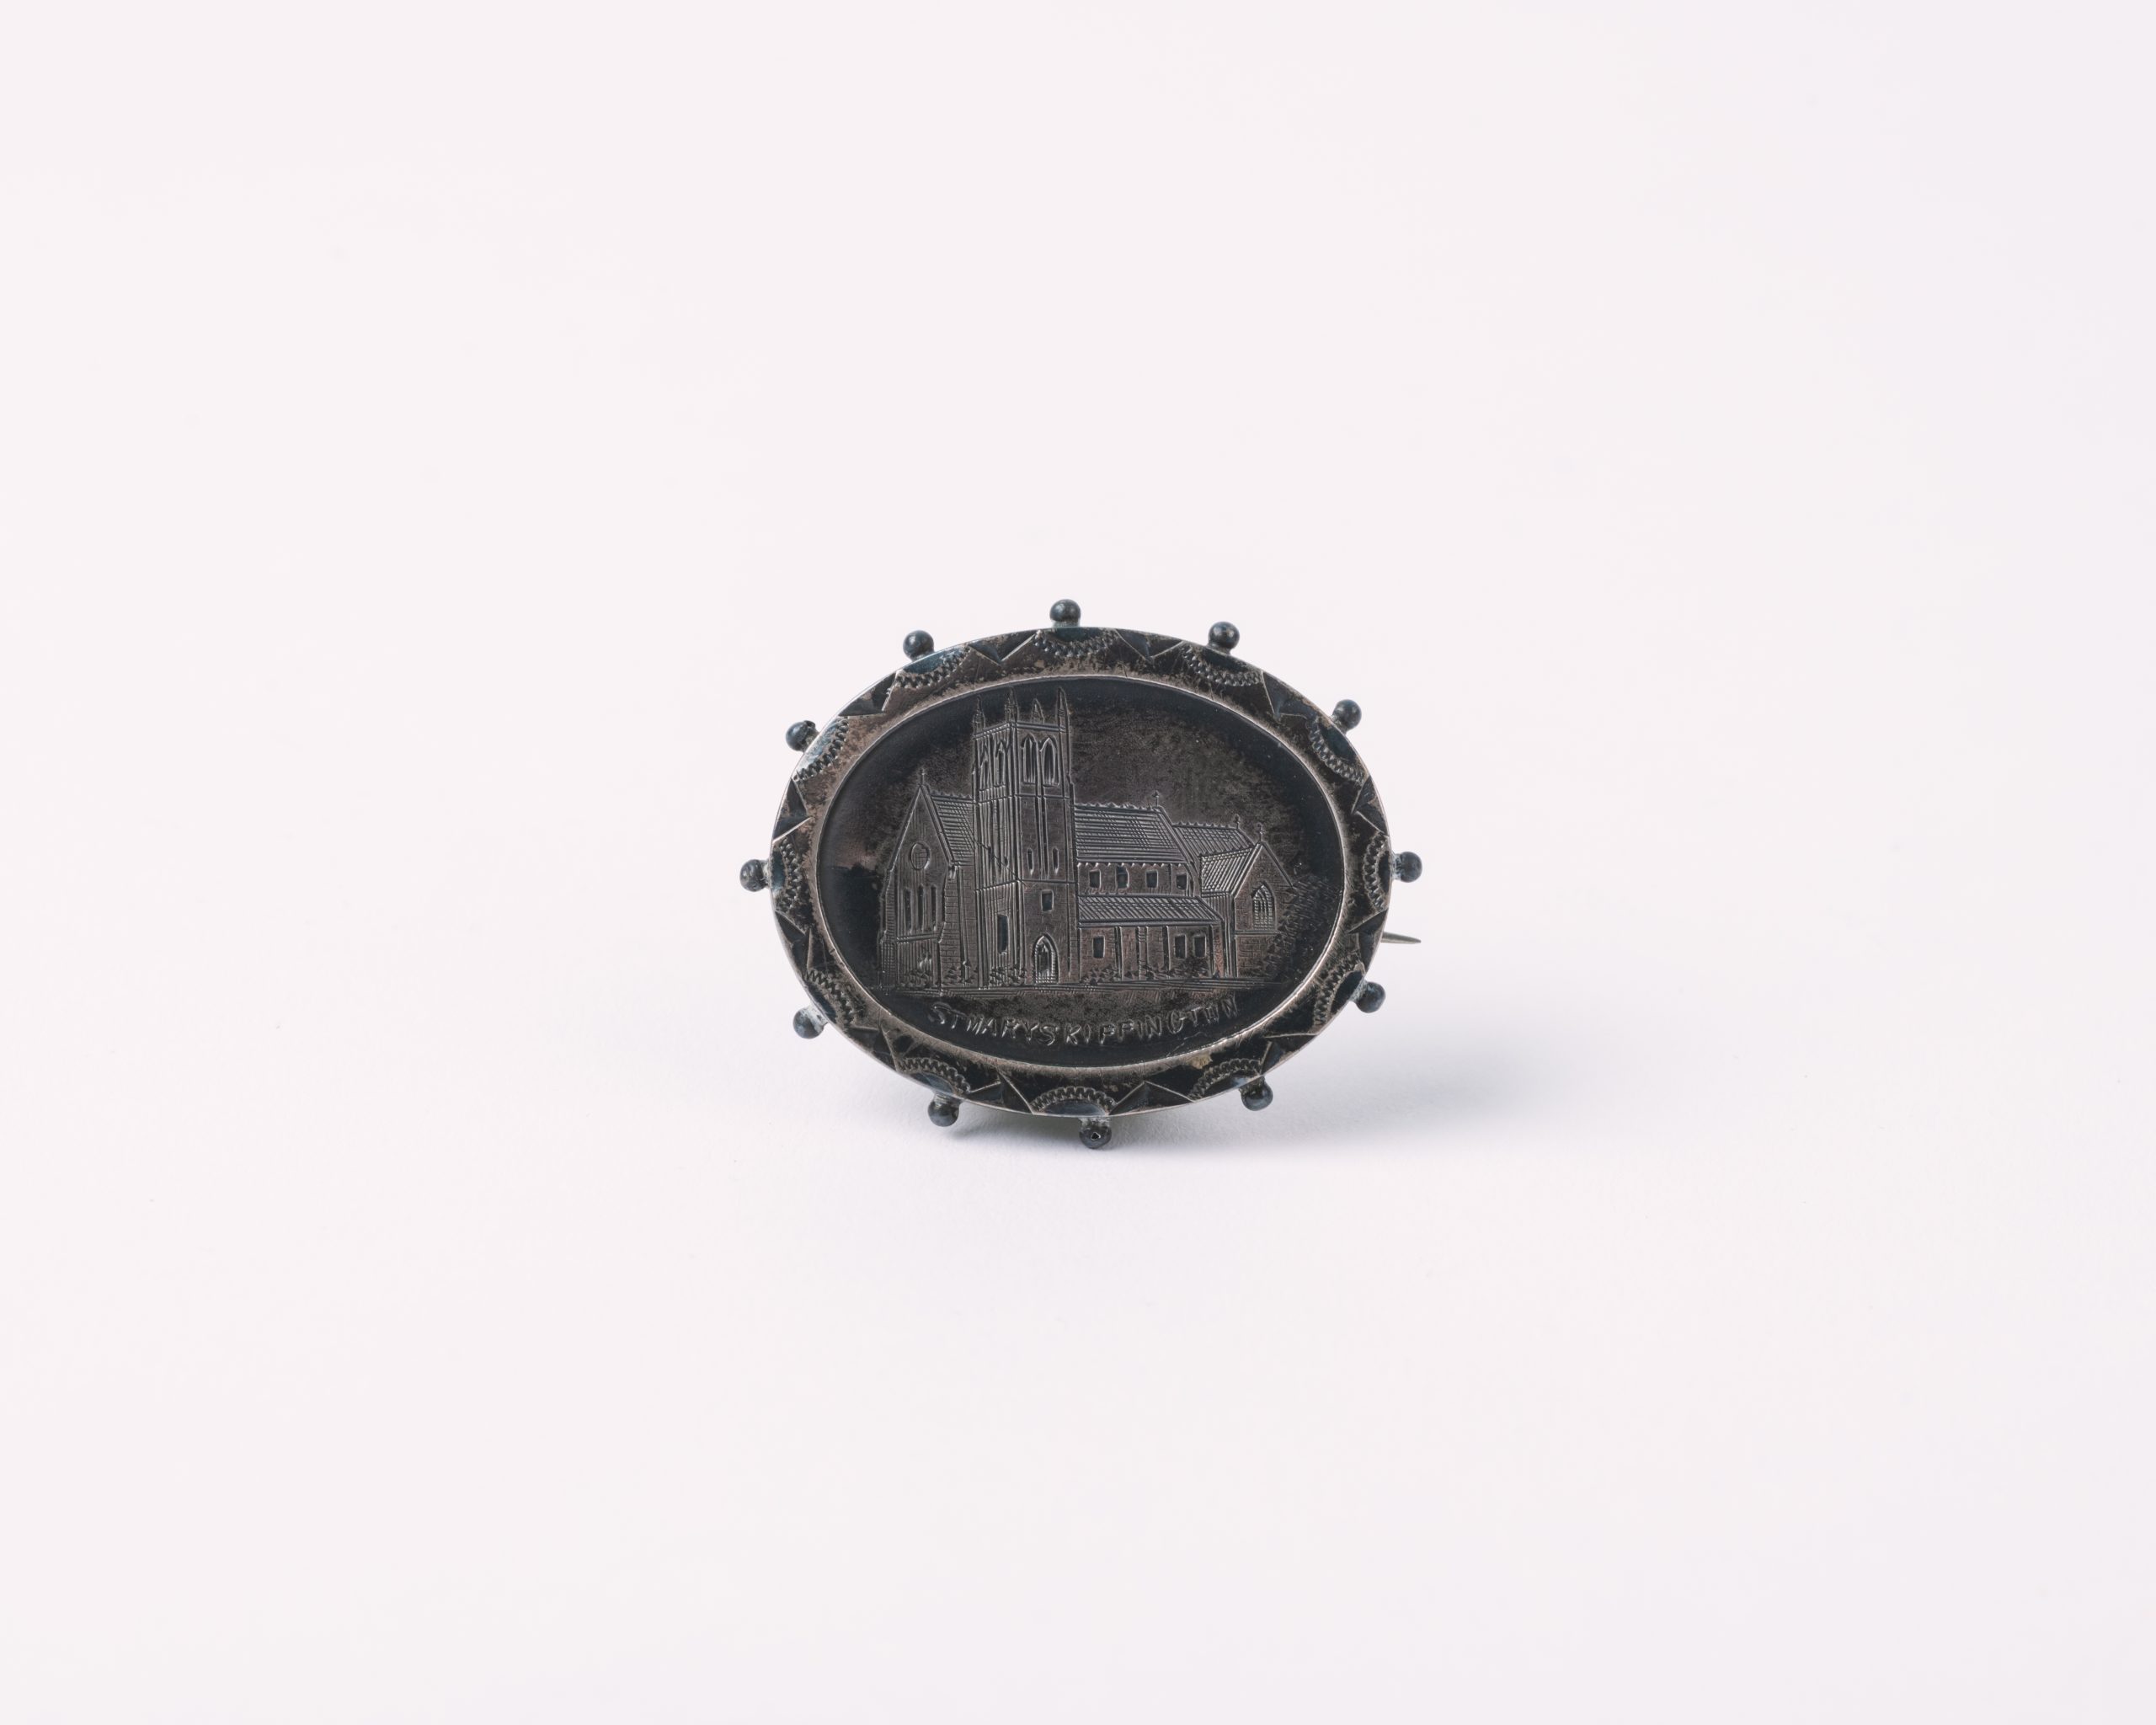 Image of small silver brooch, engraved on the surface is the image of a church